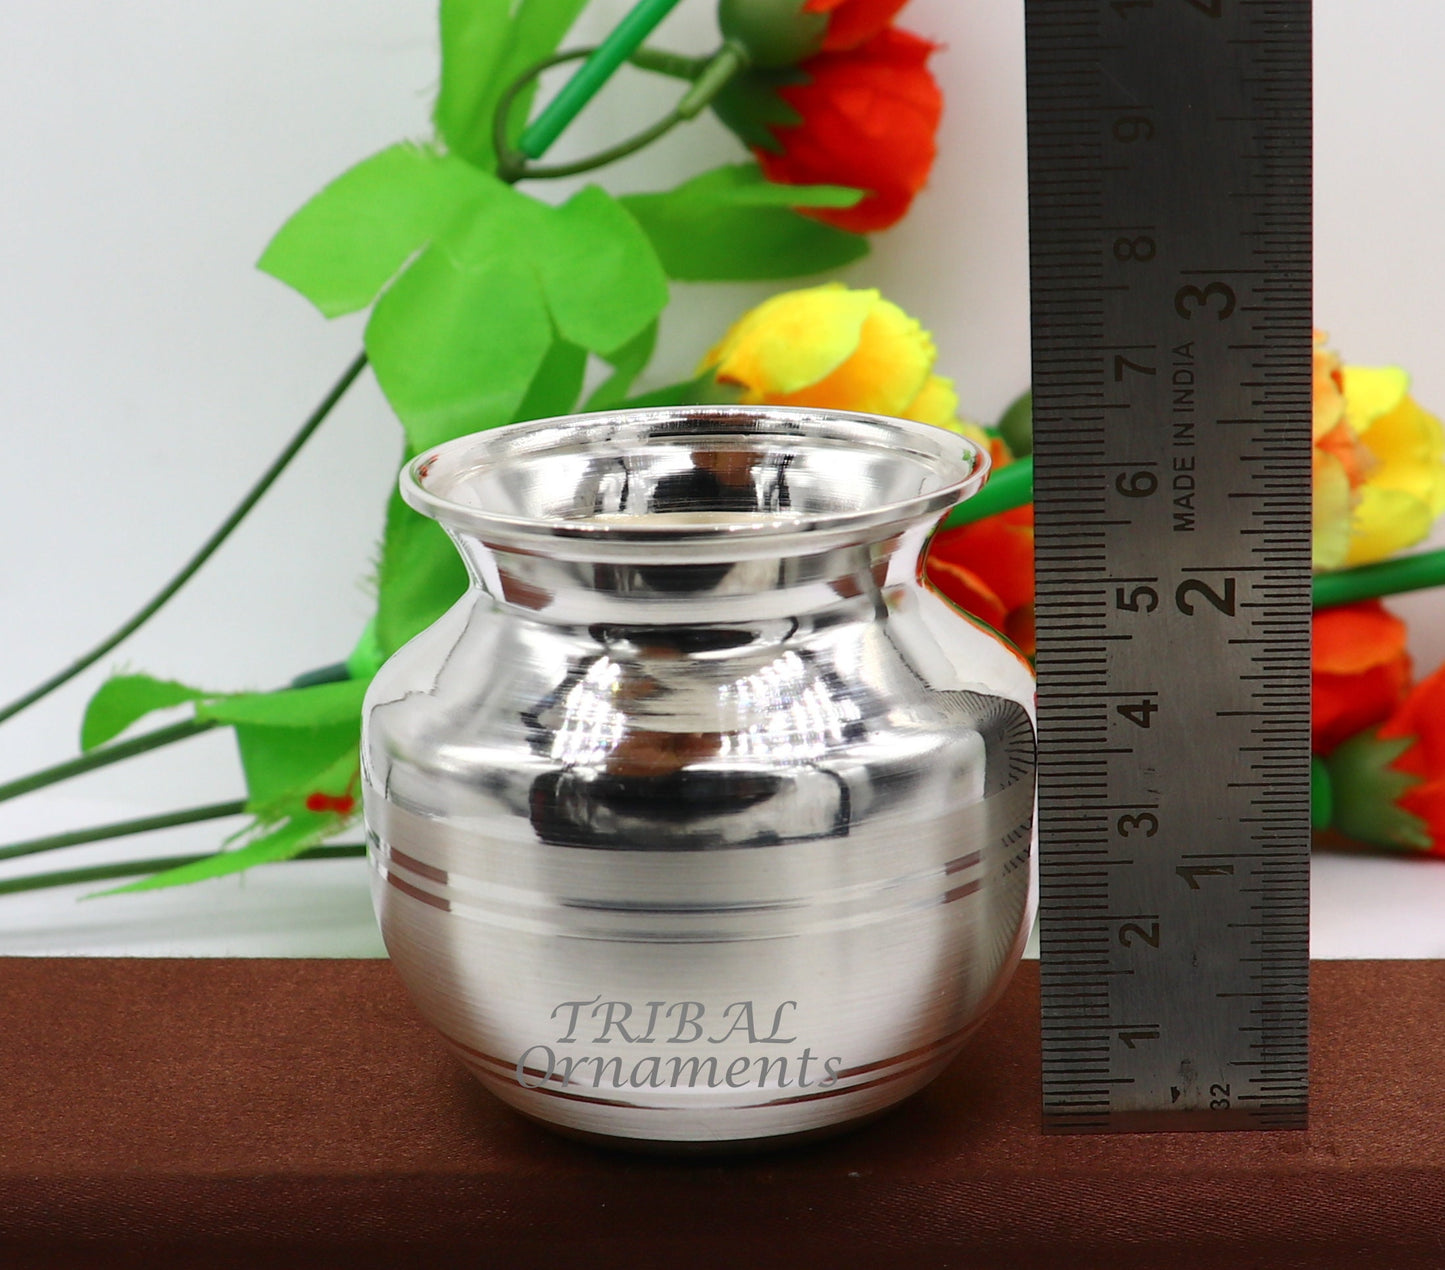 2.3"inches 925 sterling silver handmade plain small Kalash or pot, unique special silver puja article, water or milk kalash pot india su988 - TRIBAL ORNAMENTS